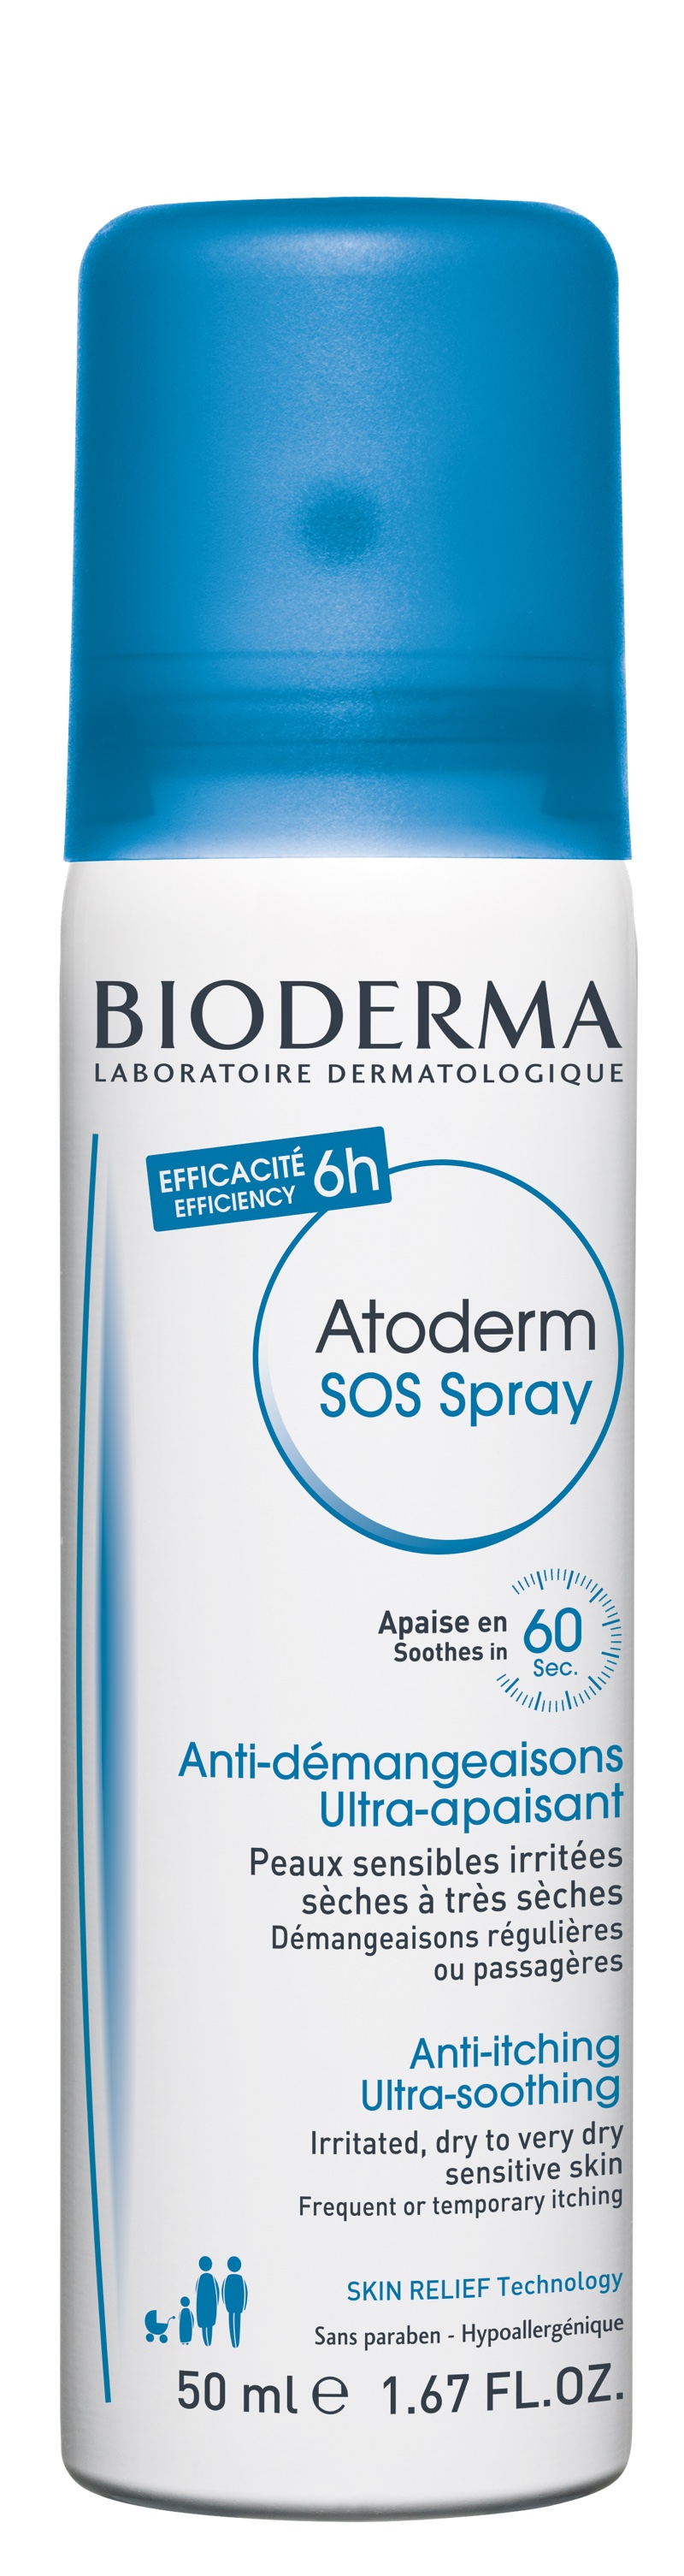 Bioderma introduces new anti-itching relief spray